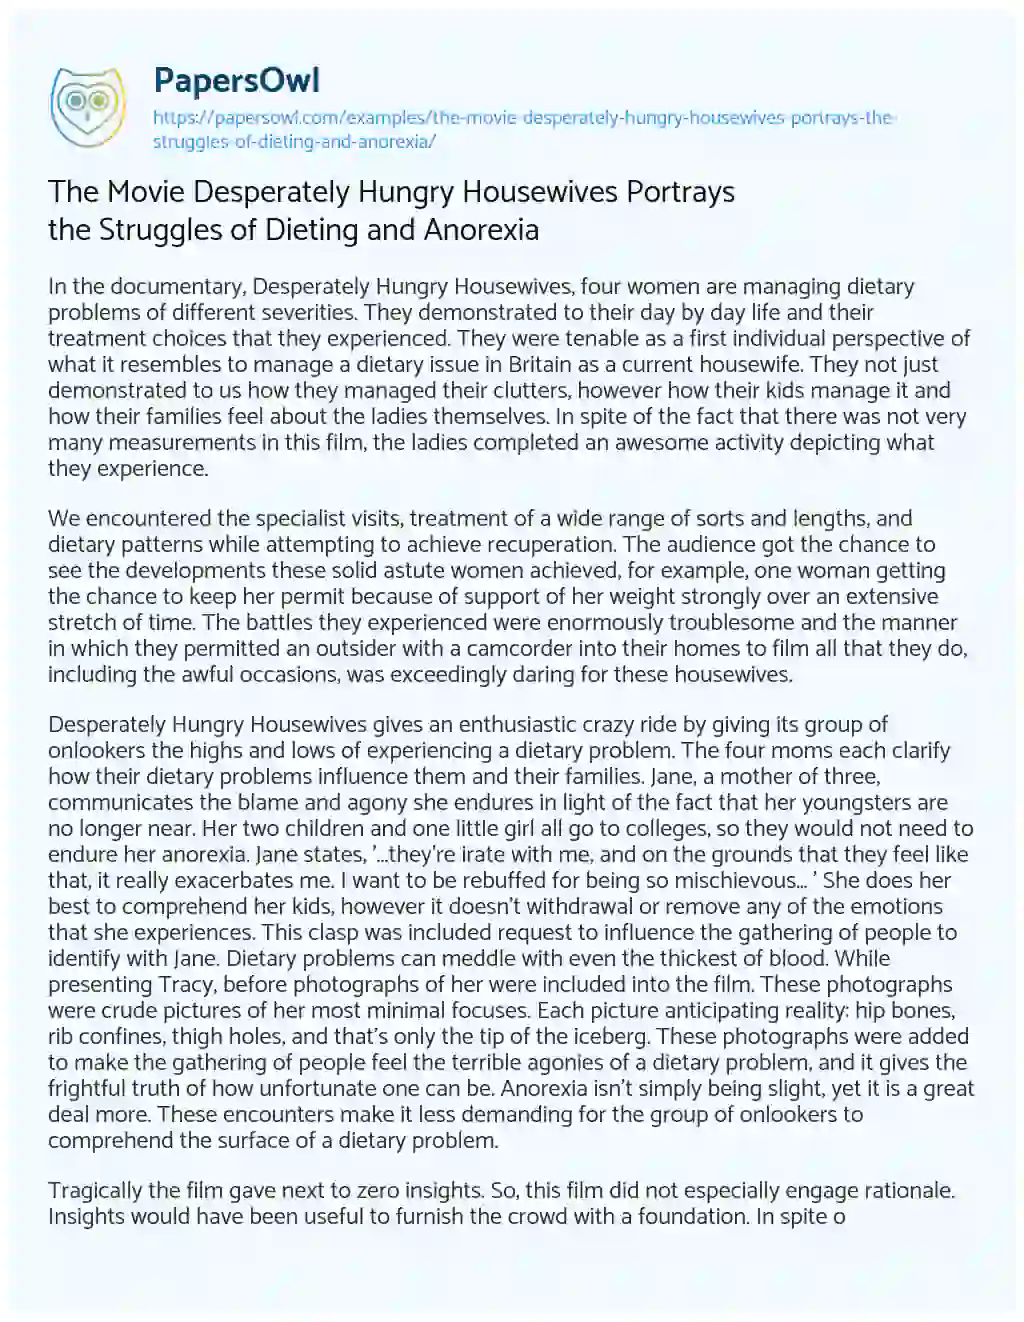 Essay on The Movie Desperately Hungry Housewives Portrays the Struggles of Dieting and Anorexia